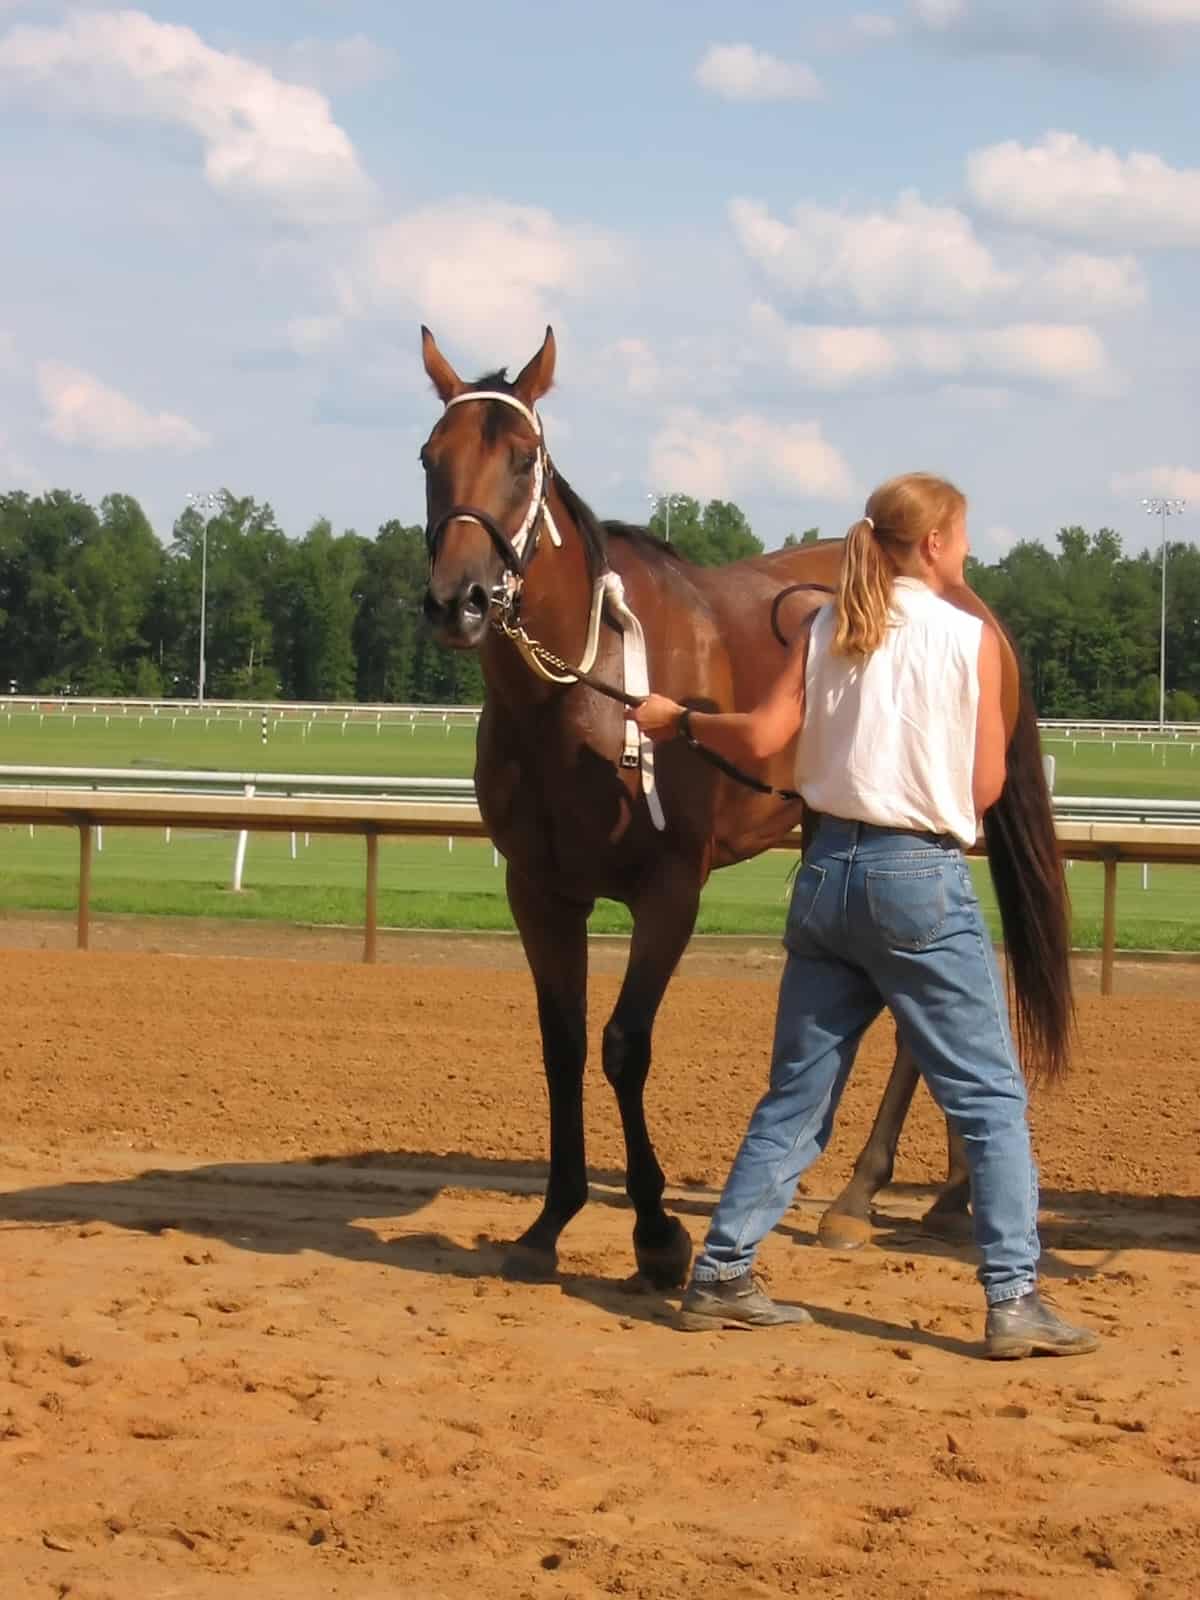 "A thoroughbred race horse at the track, with it's trainer."